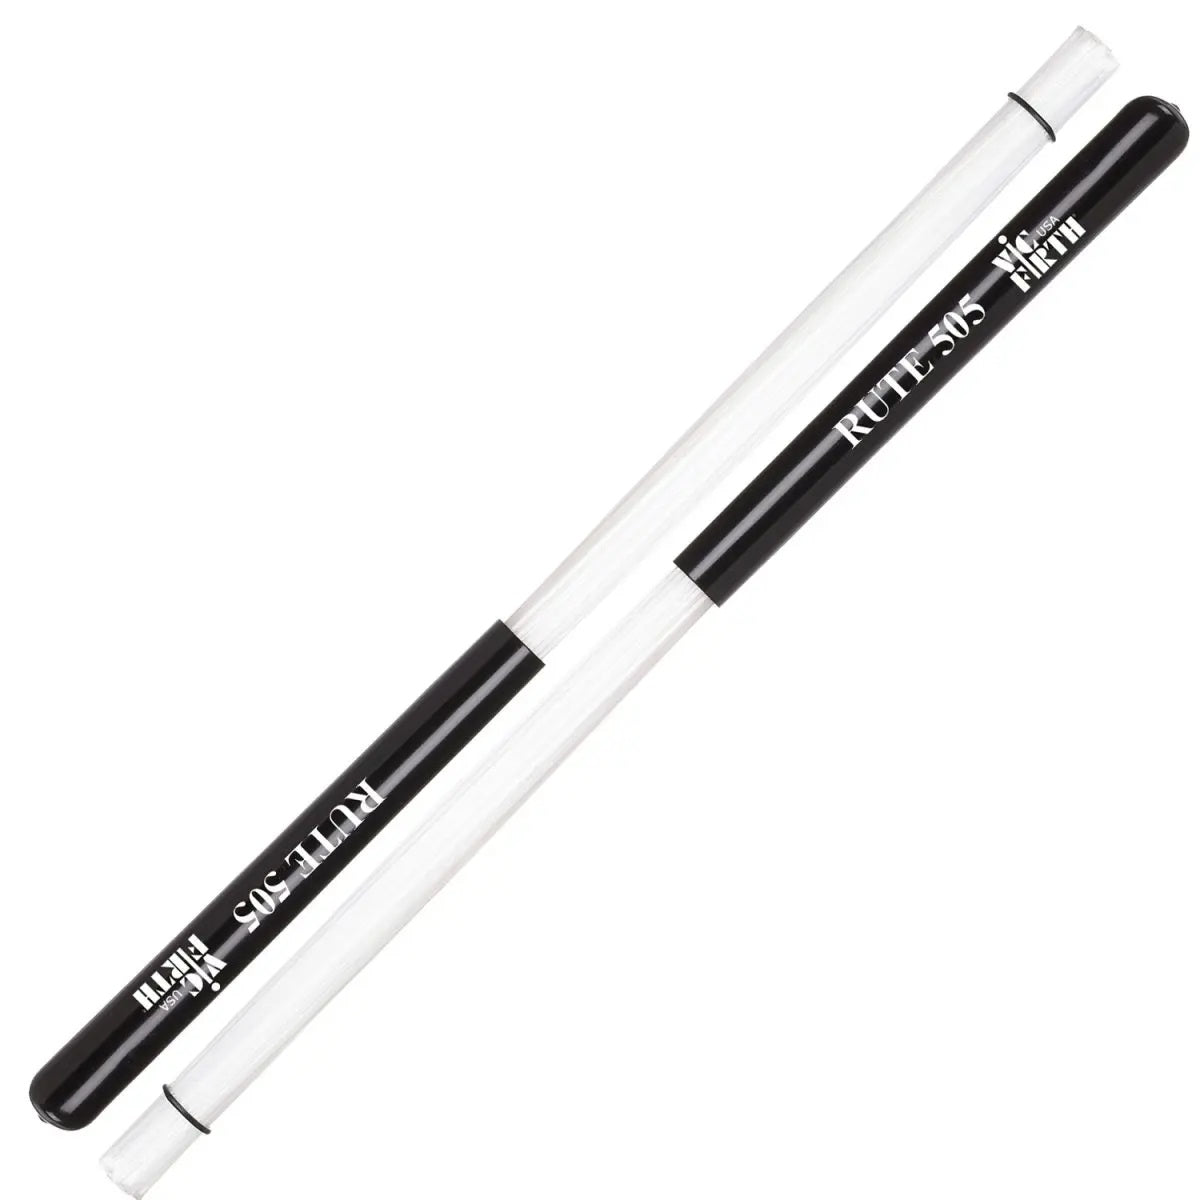 VIC FIRTH RUTE 505 RODS